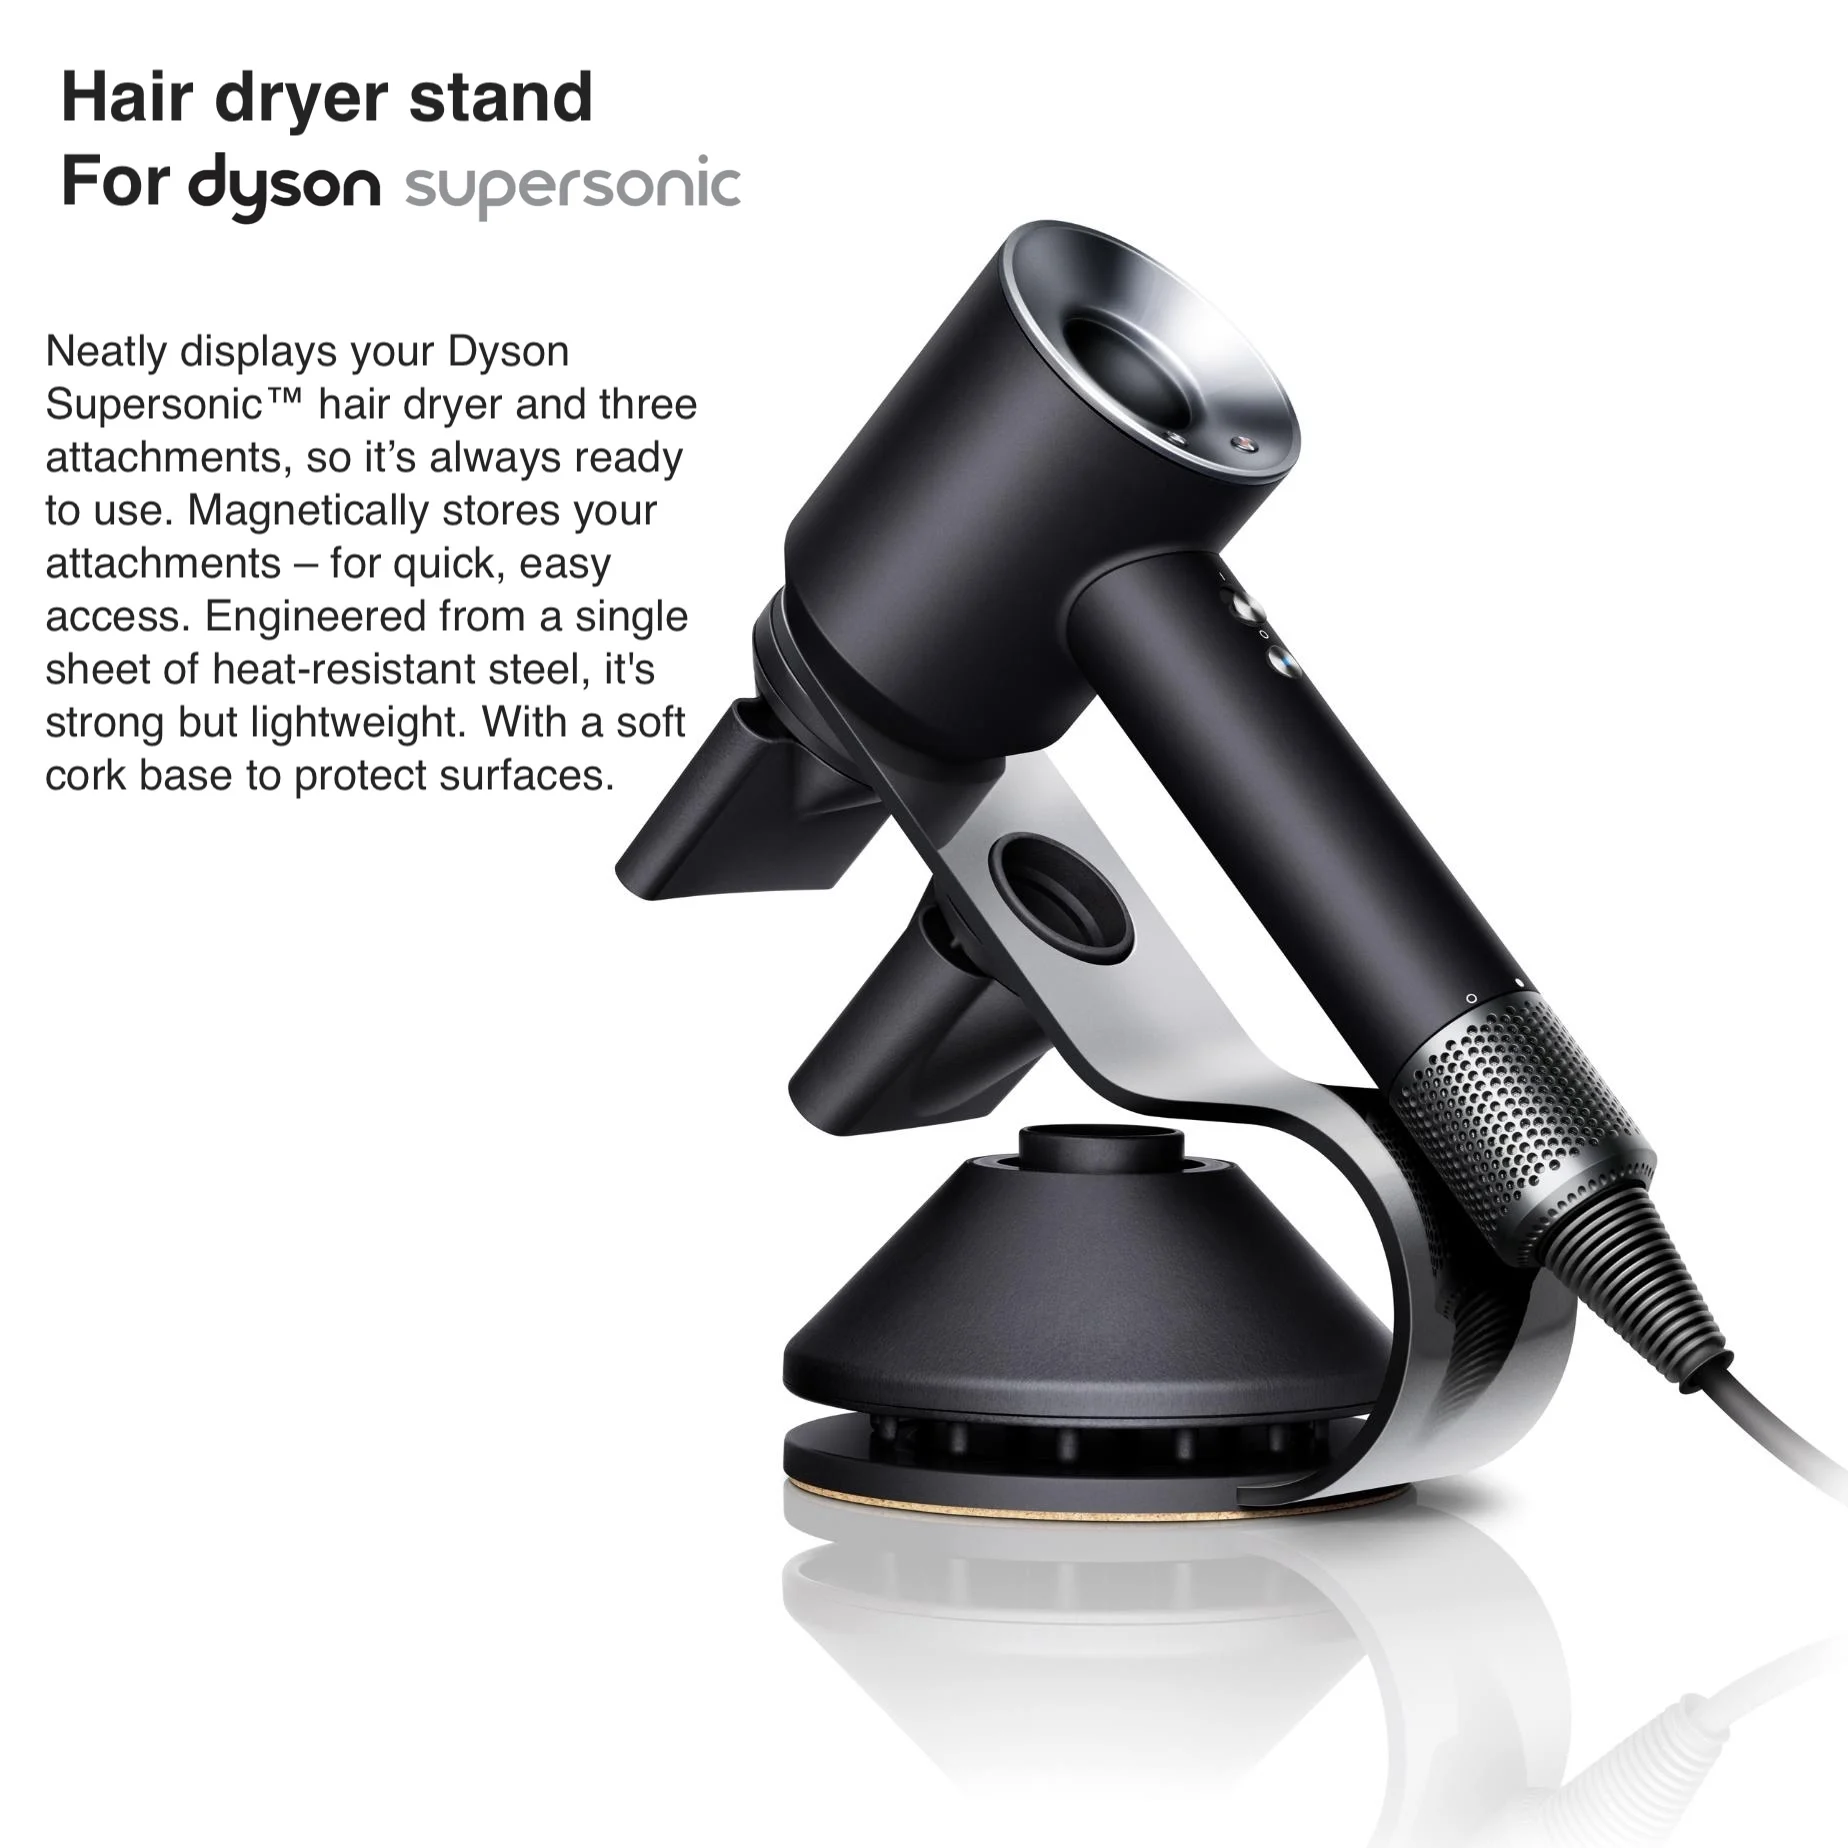 Hair Dryer Stand For Dyson Original Bracket For Super Hair Dryer Stand